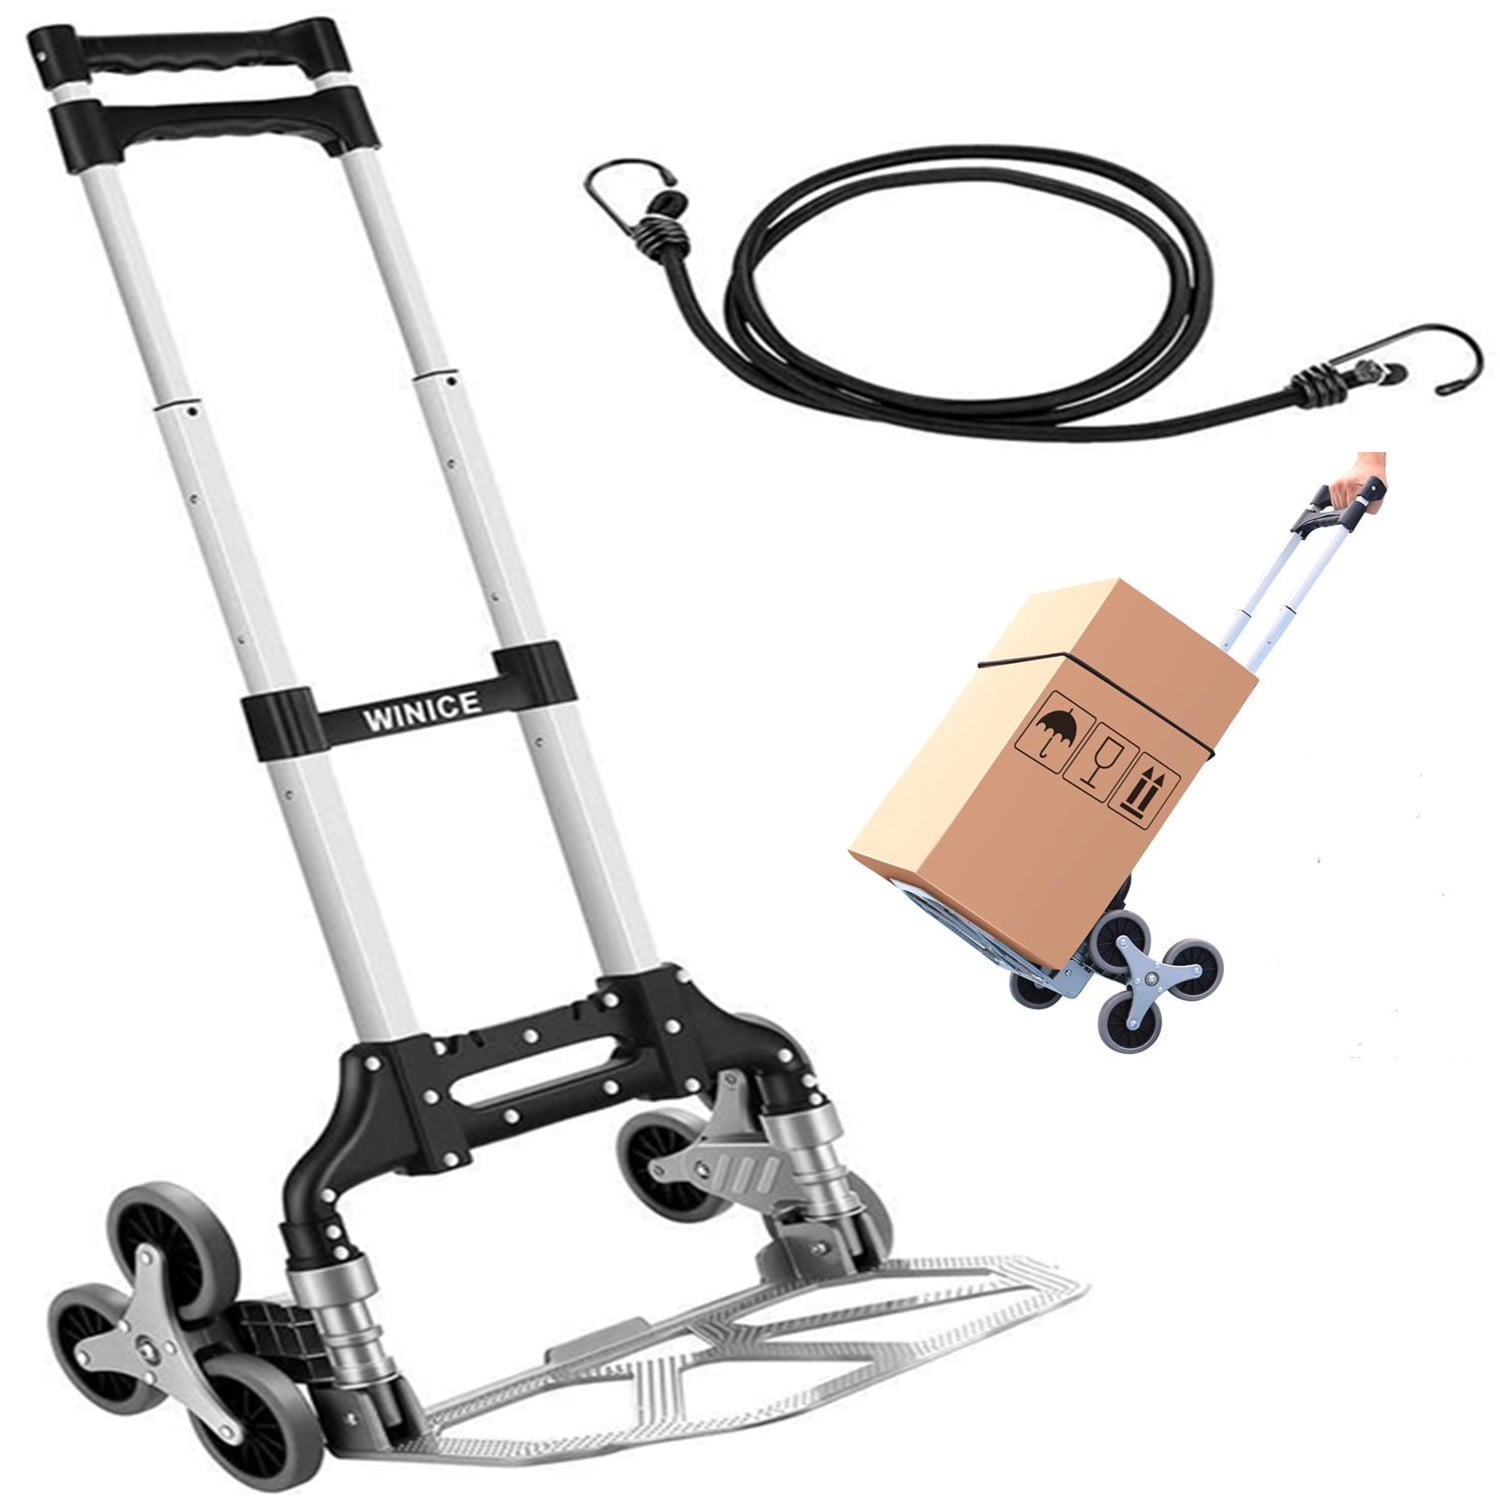 WINICE Stair Climber Truck Portable Folding Trolley Adjustable Handle Cart Home 